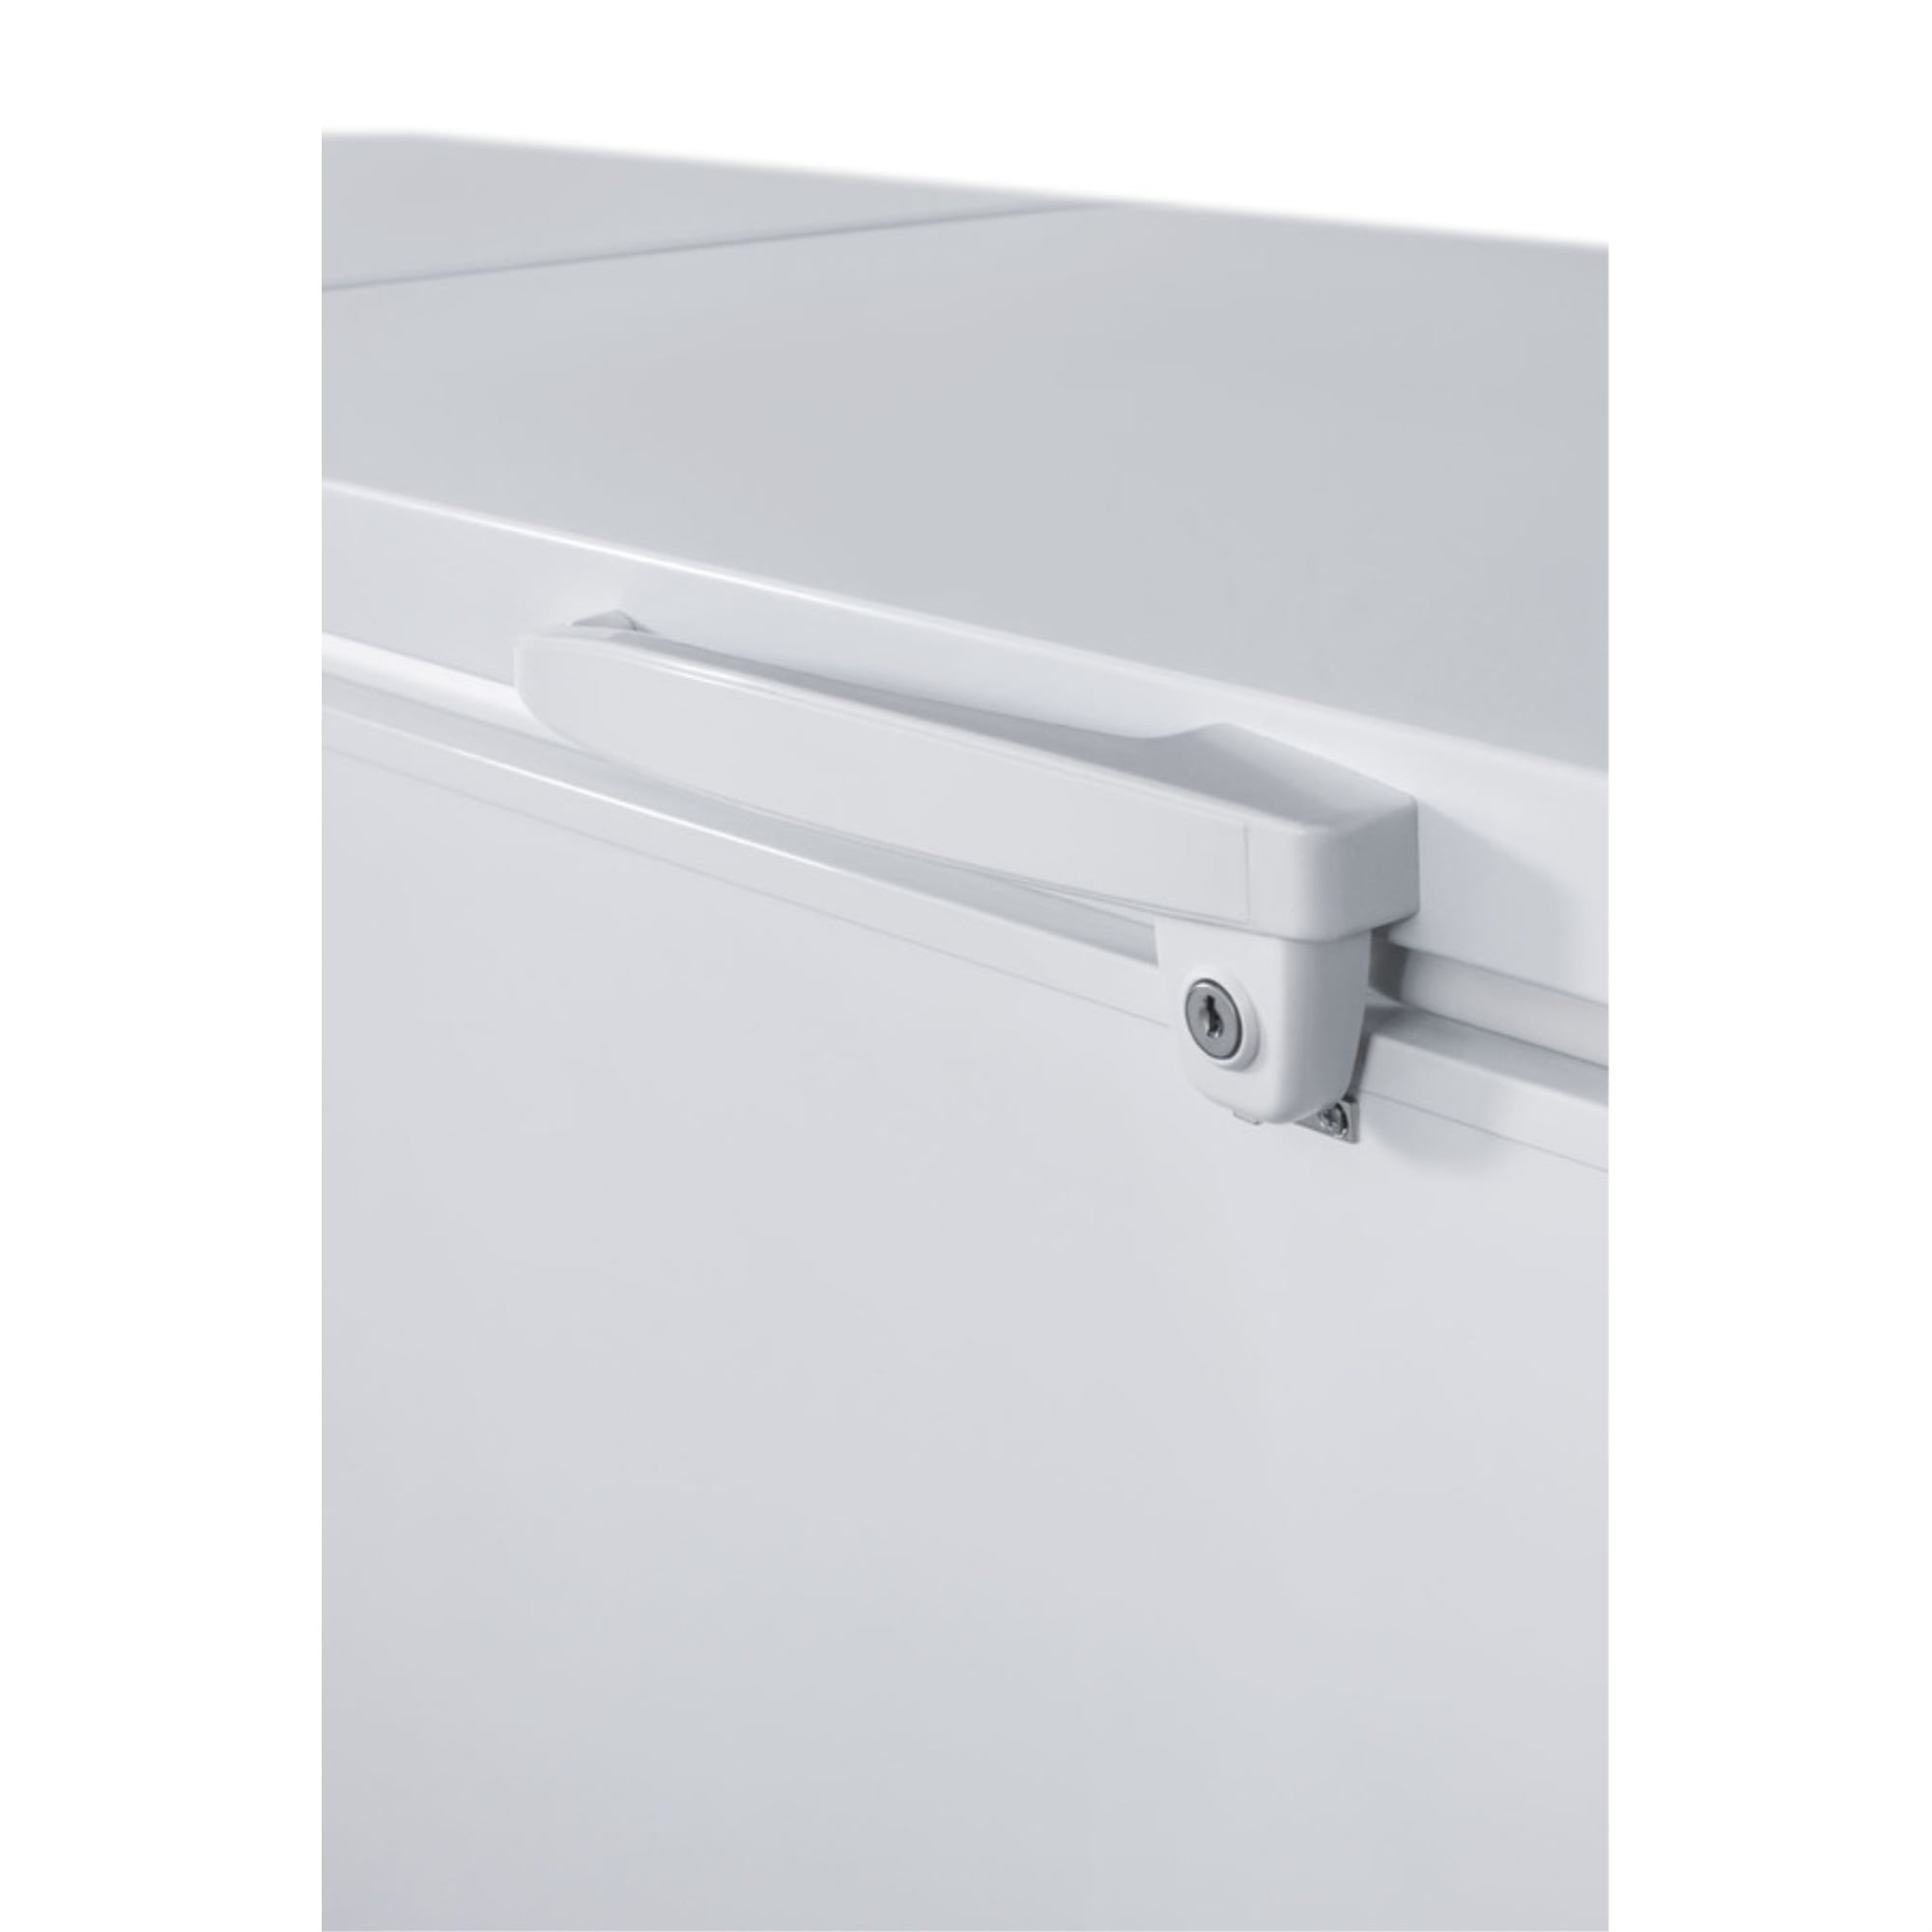 KISSAIR 1.1 Cu.ft Mini Freezer, Small Freezer with Removable Shelves,  Adjustable Thermostat, Reversible Door Hinge, For Home/Office/Kitchen/RV  (White)